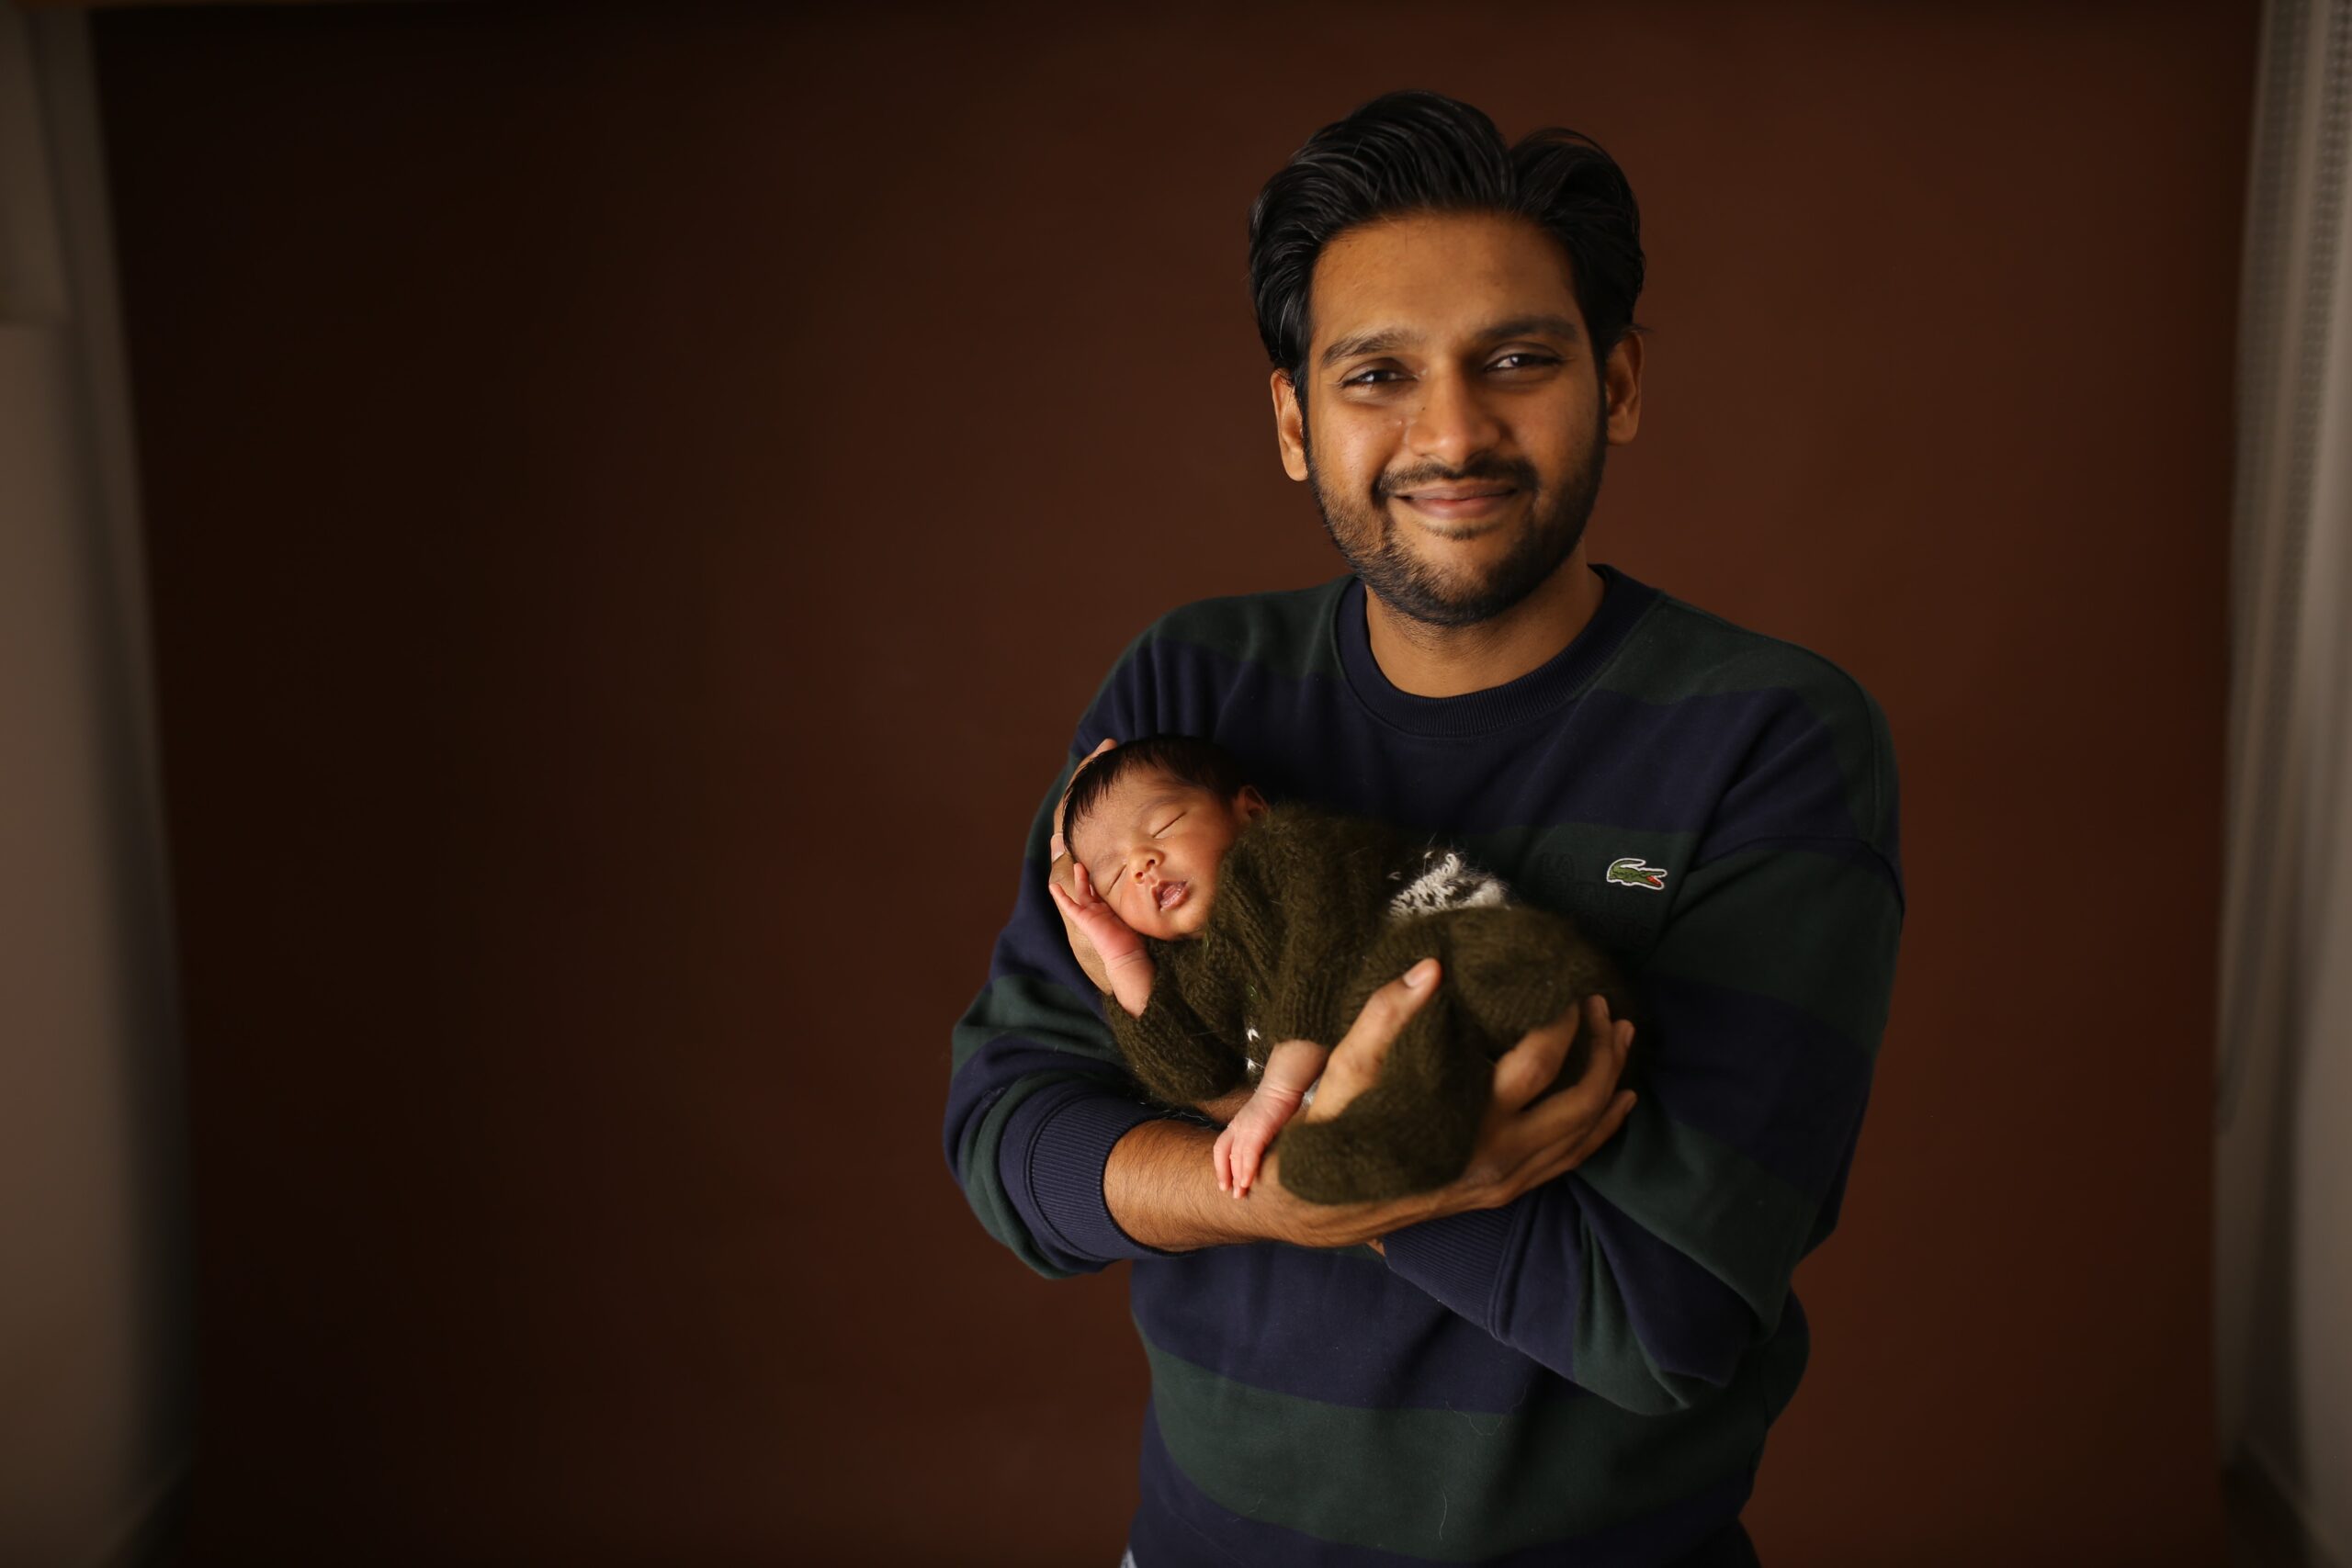 Aniket, father of a 1-year-old son, needs an urgent stem cell donation to survive